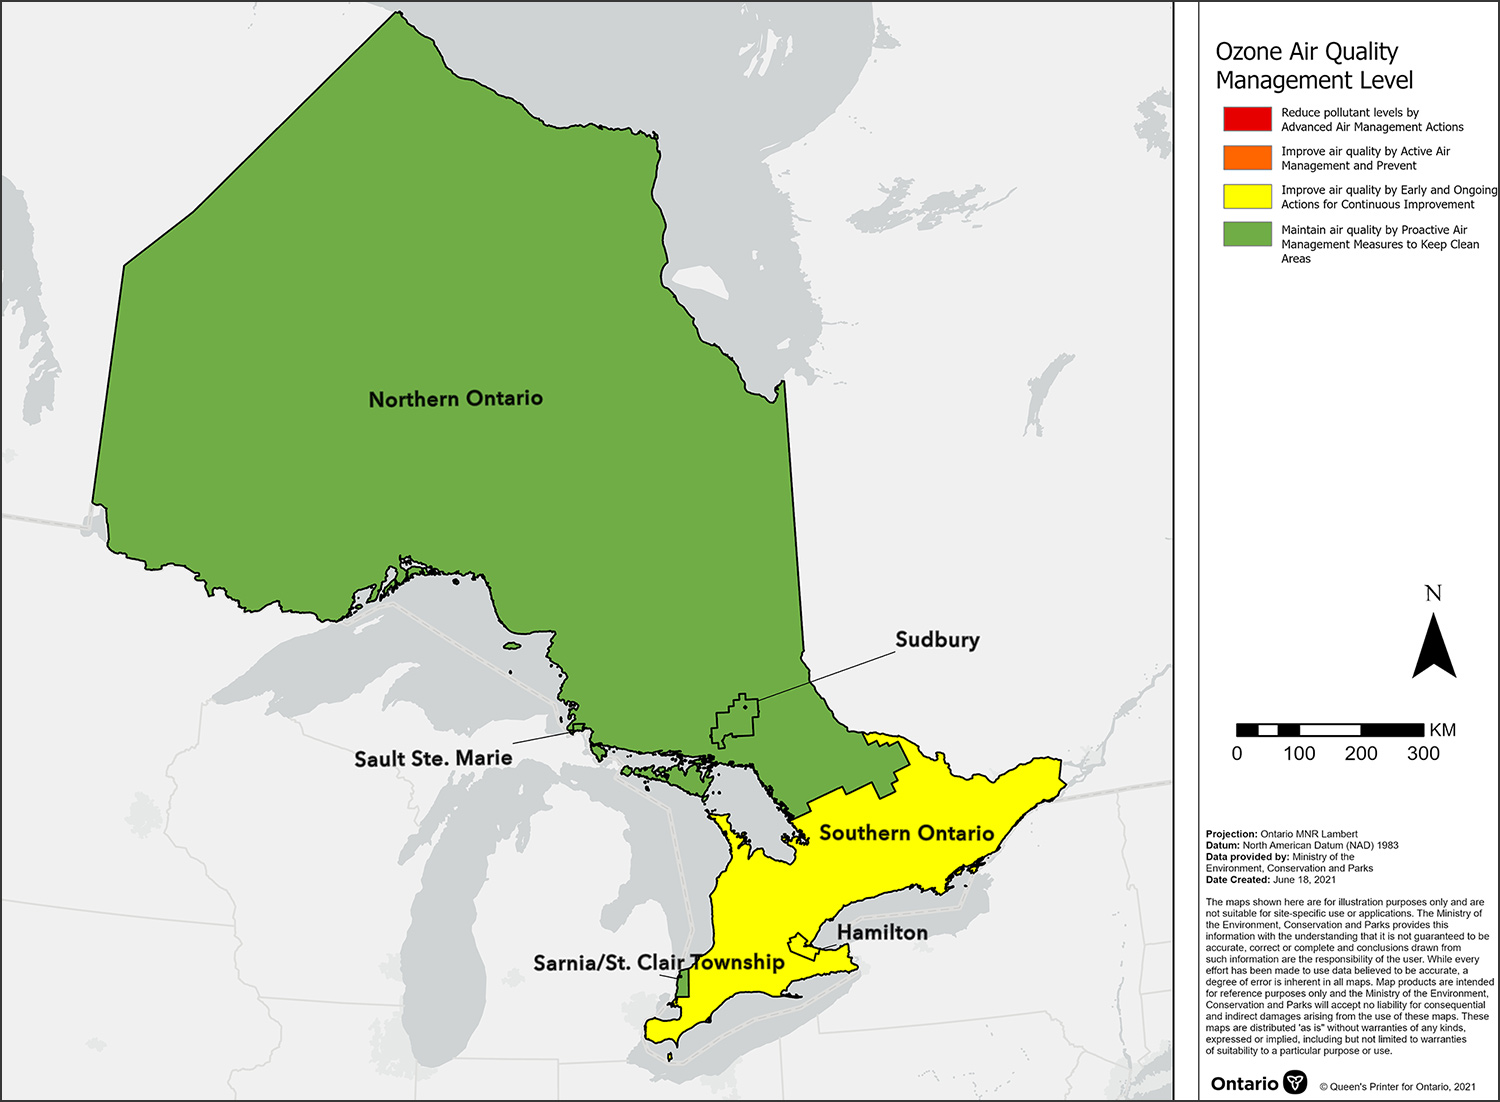 Map showing the ozone Canadian Ambient Air Quality Standard effective management levels for air zones across Ontario